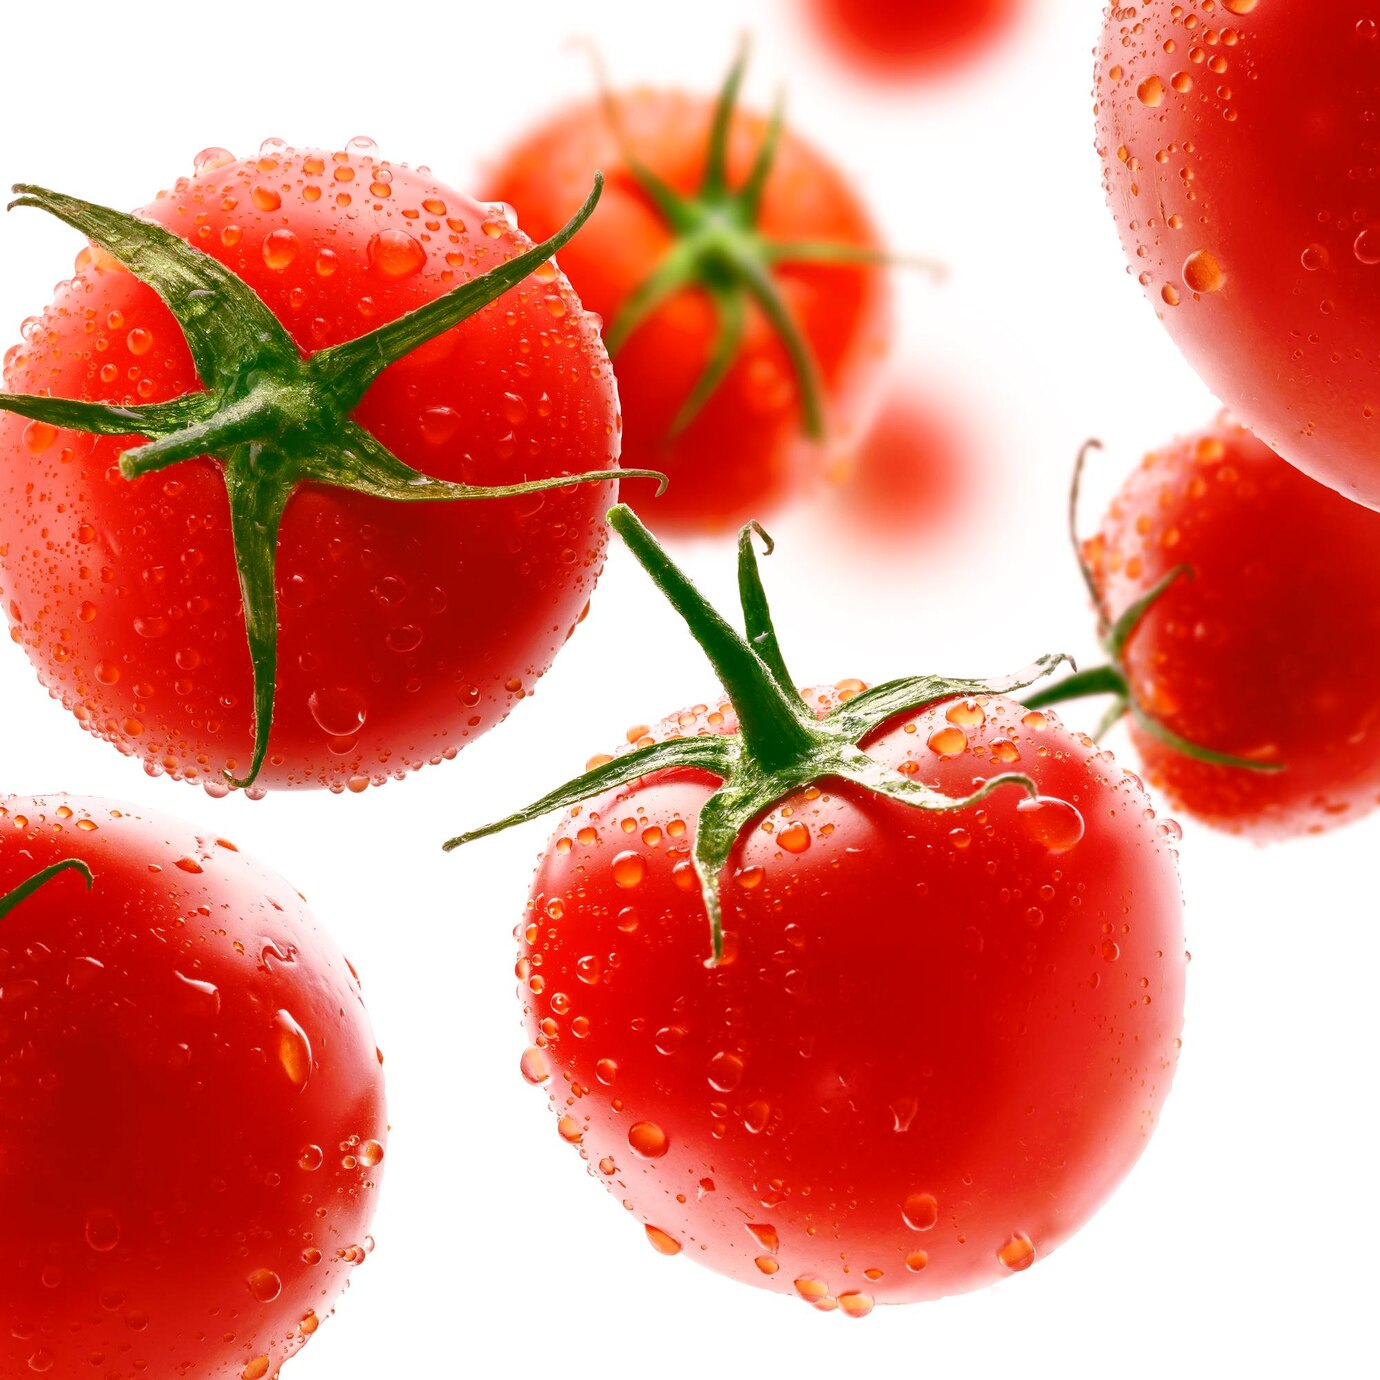 Red Tomatoes Levitate White Background 485709 48